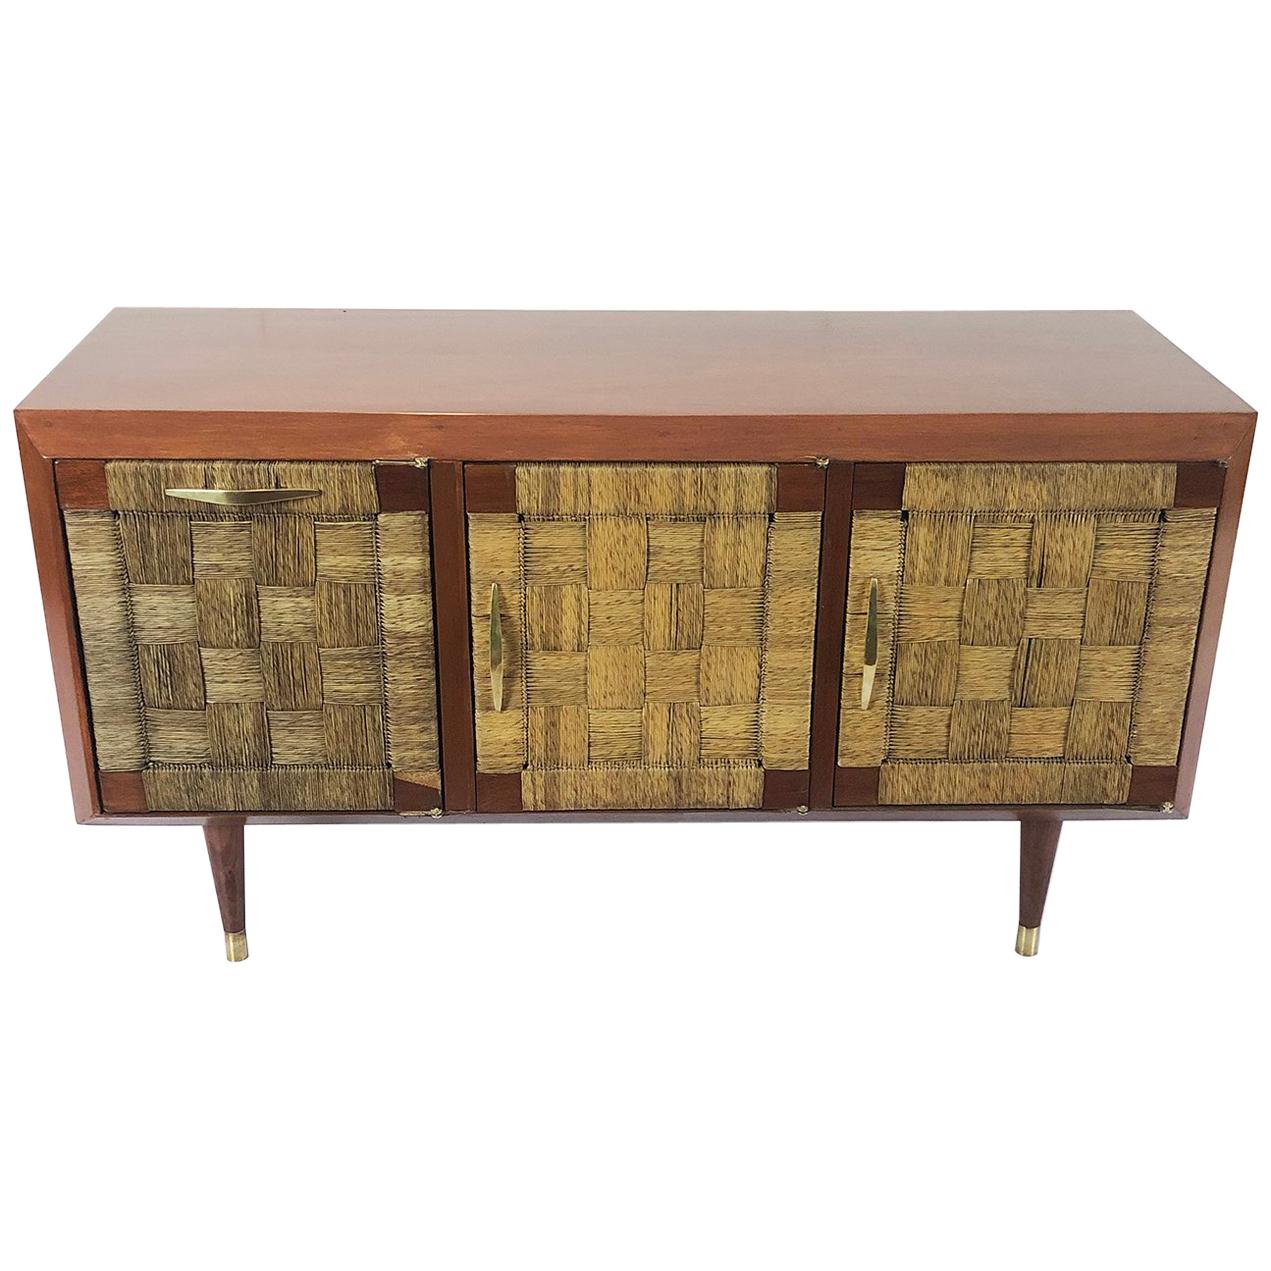 Petite Credenza in Mahogany and Woven Sea Grass Attributed to Edmond Spence